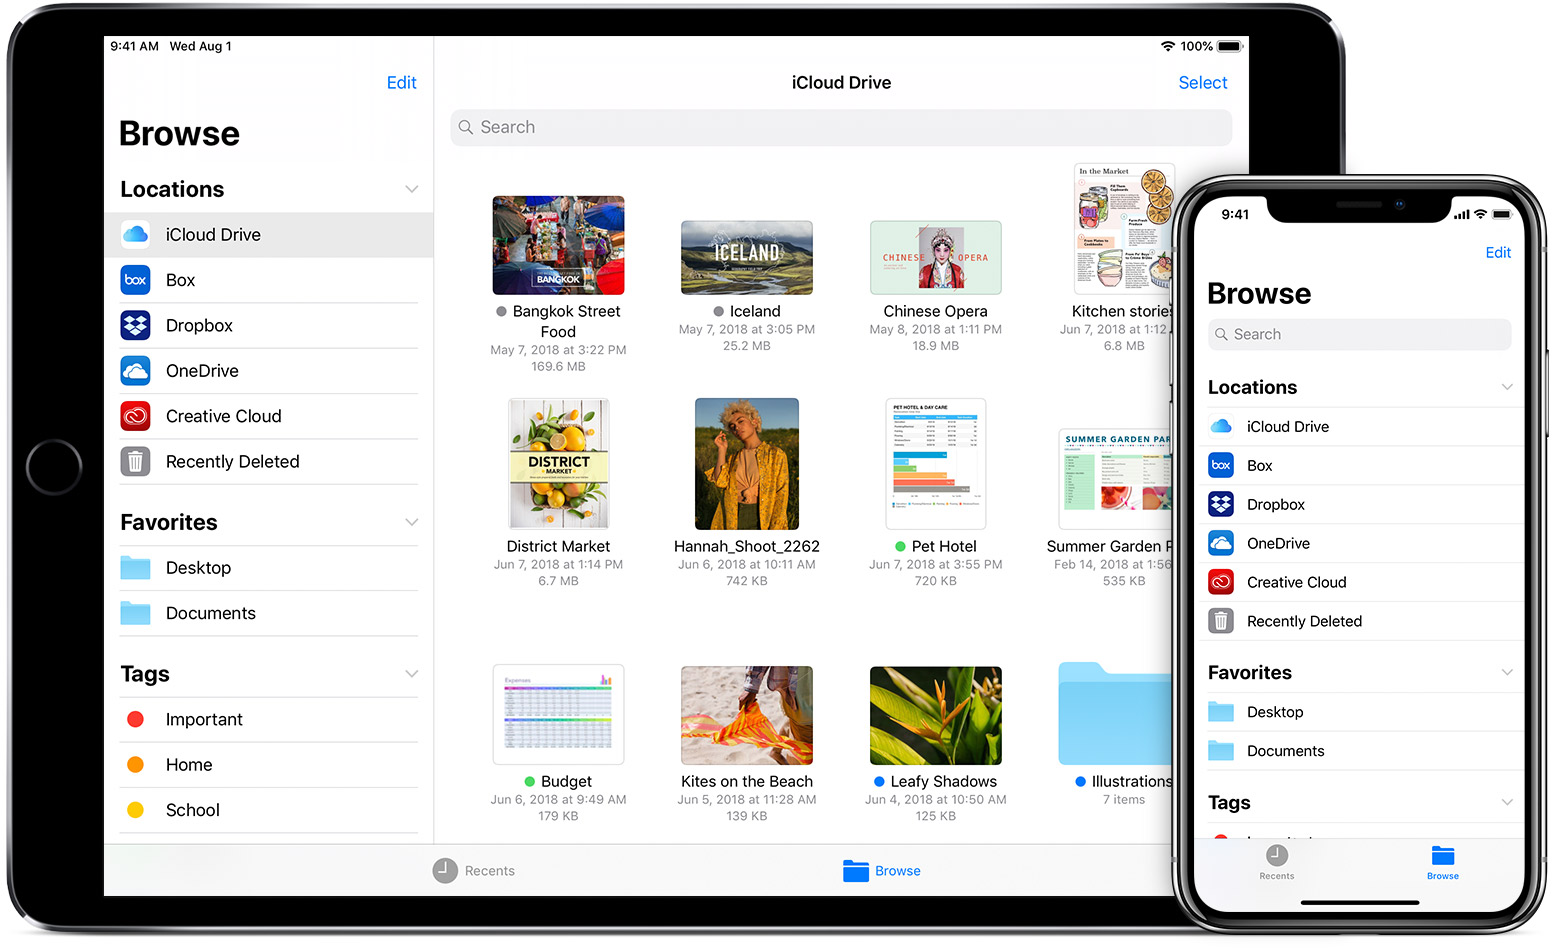 Mac showing iCloud Drive, and iPhone showing Browse screen